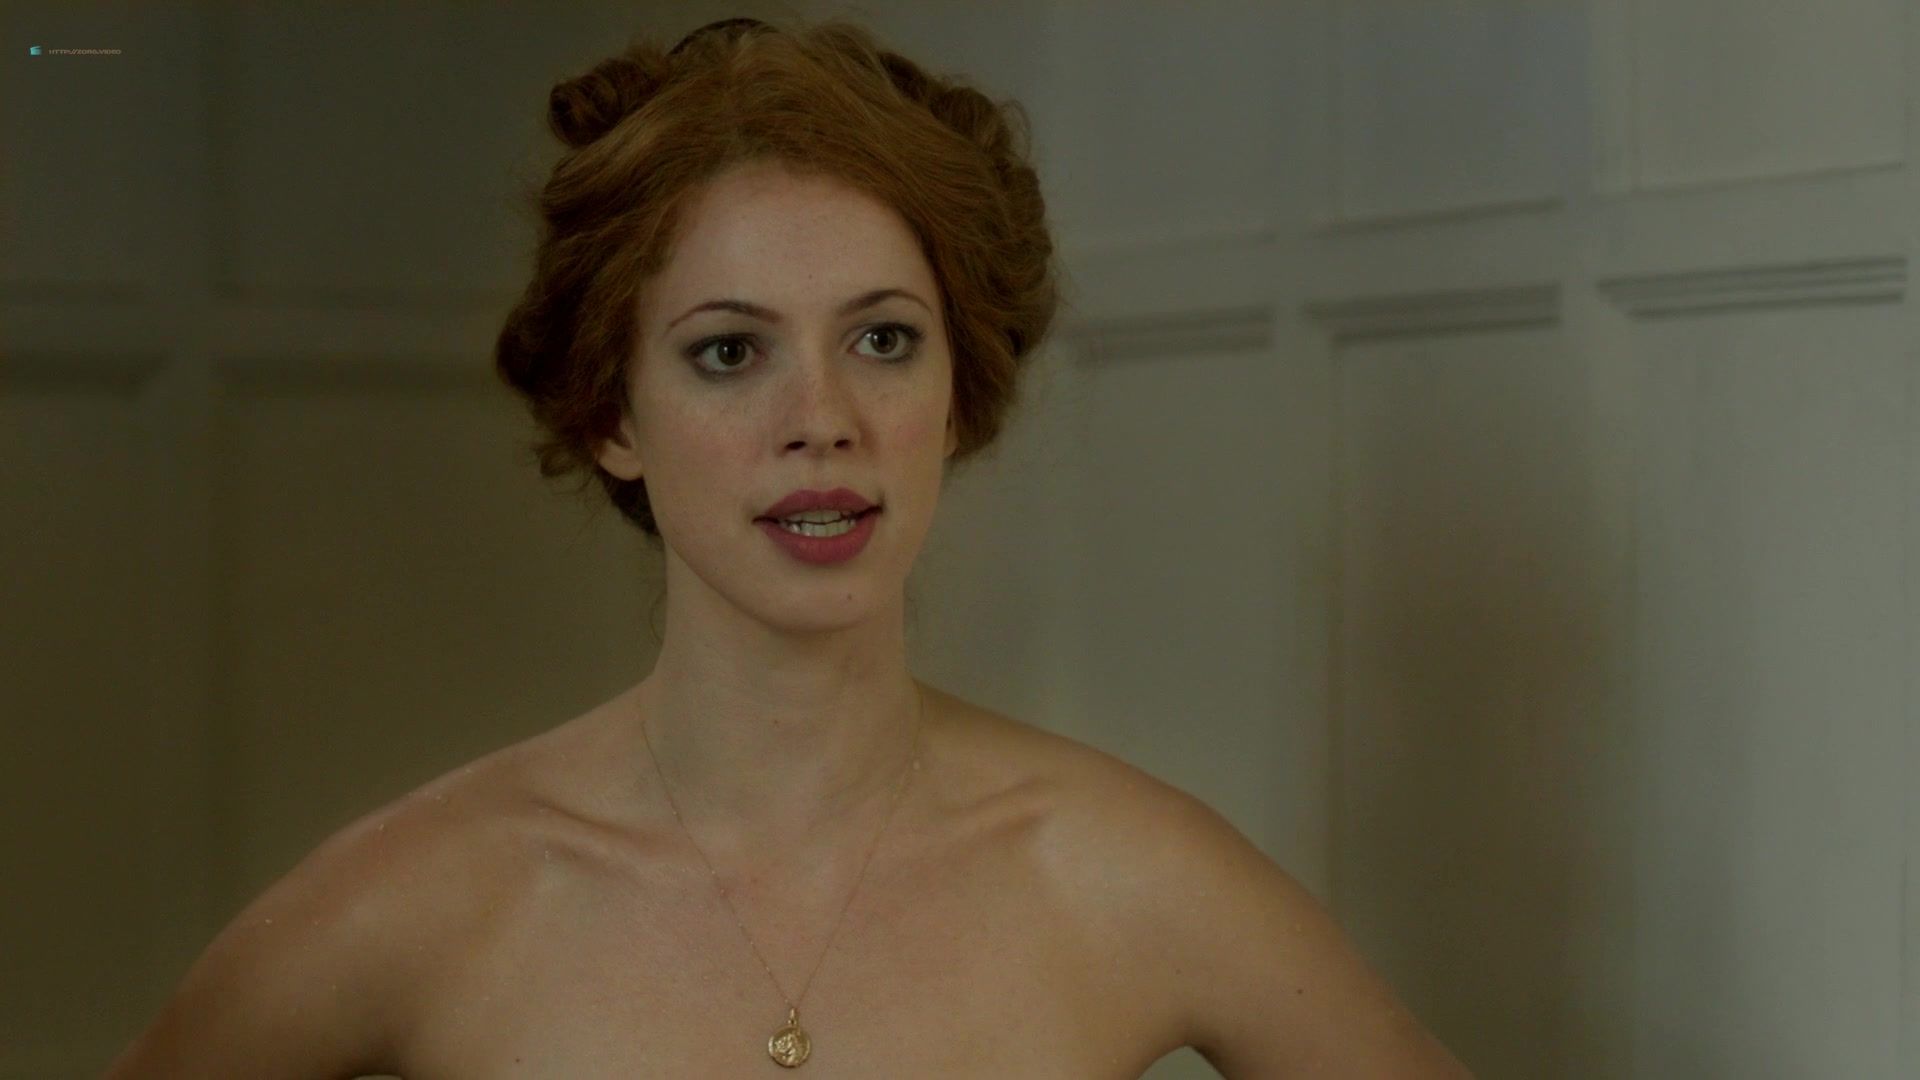 Celebrity Porn Rebecca Hall, Adelaide Clemens naked - Parades End (2012) BooLoo - 1